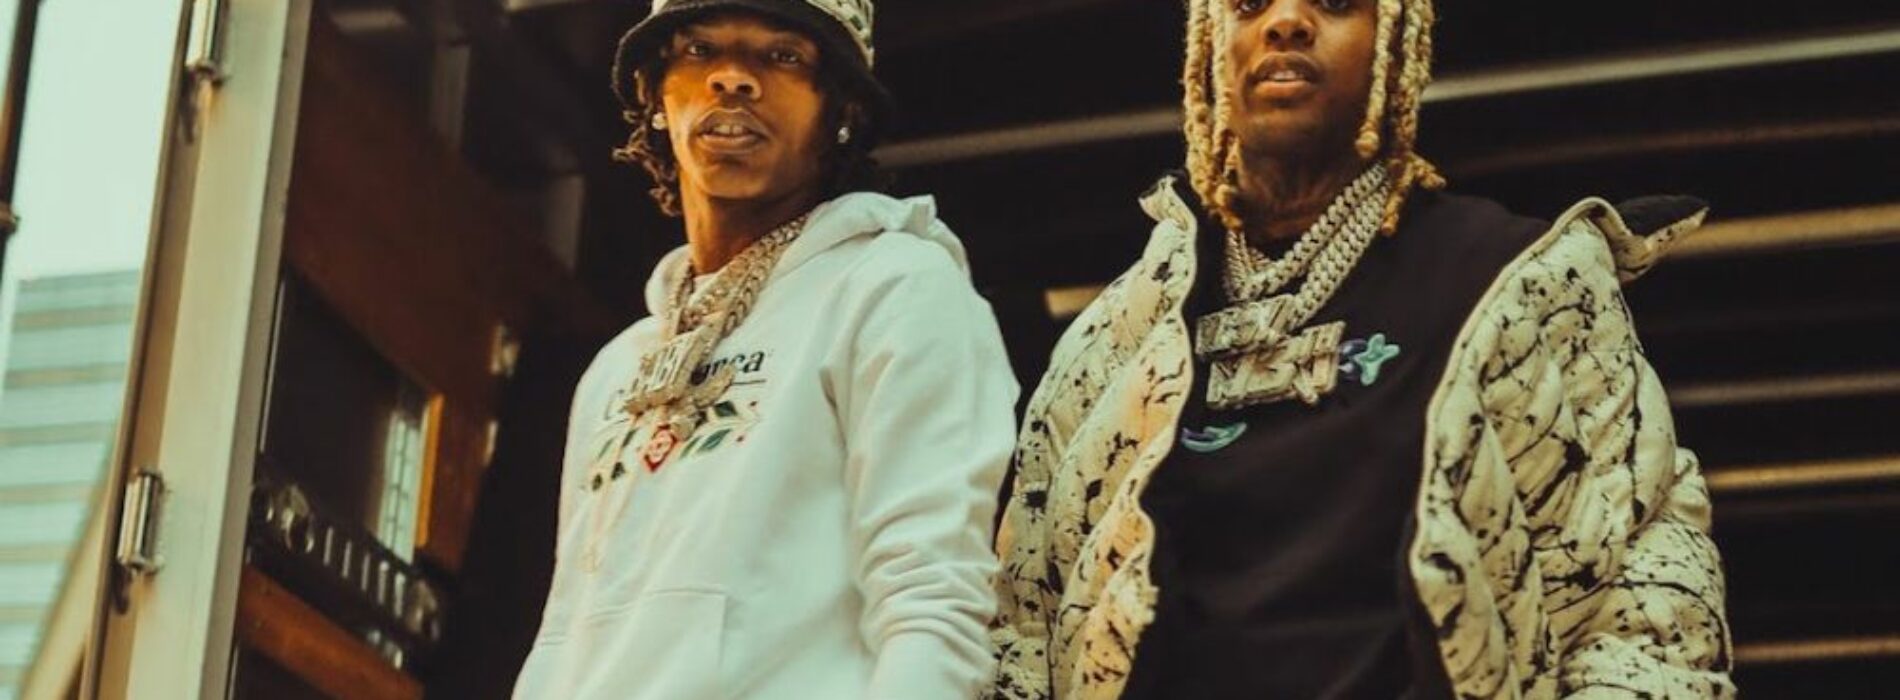 Lil Baby & Lil Durk – Voice of the Heroes (Official Video) – Juin 2021